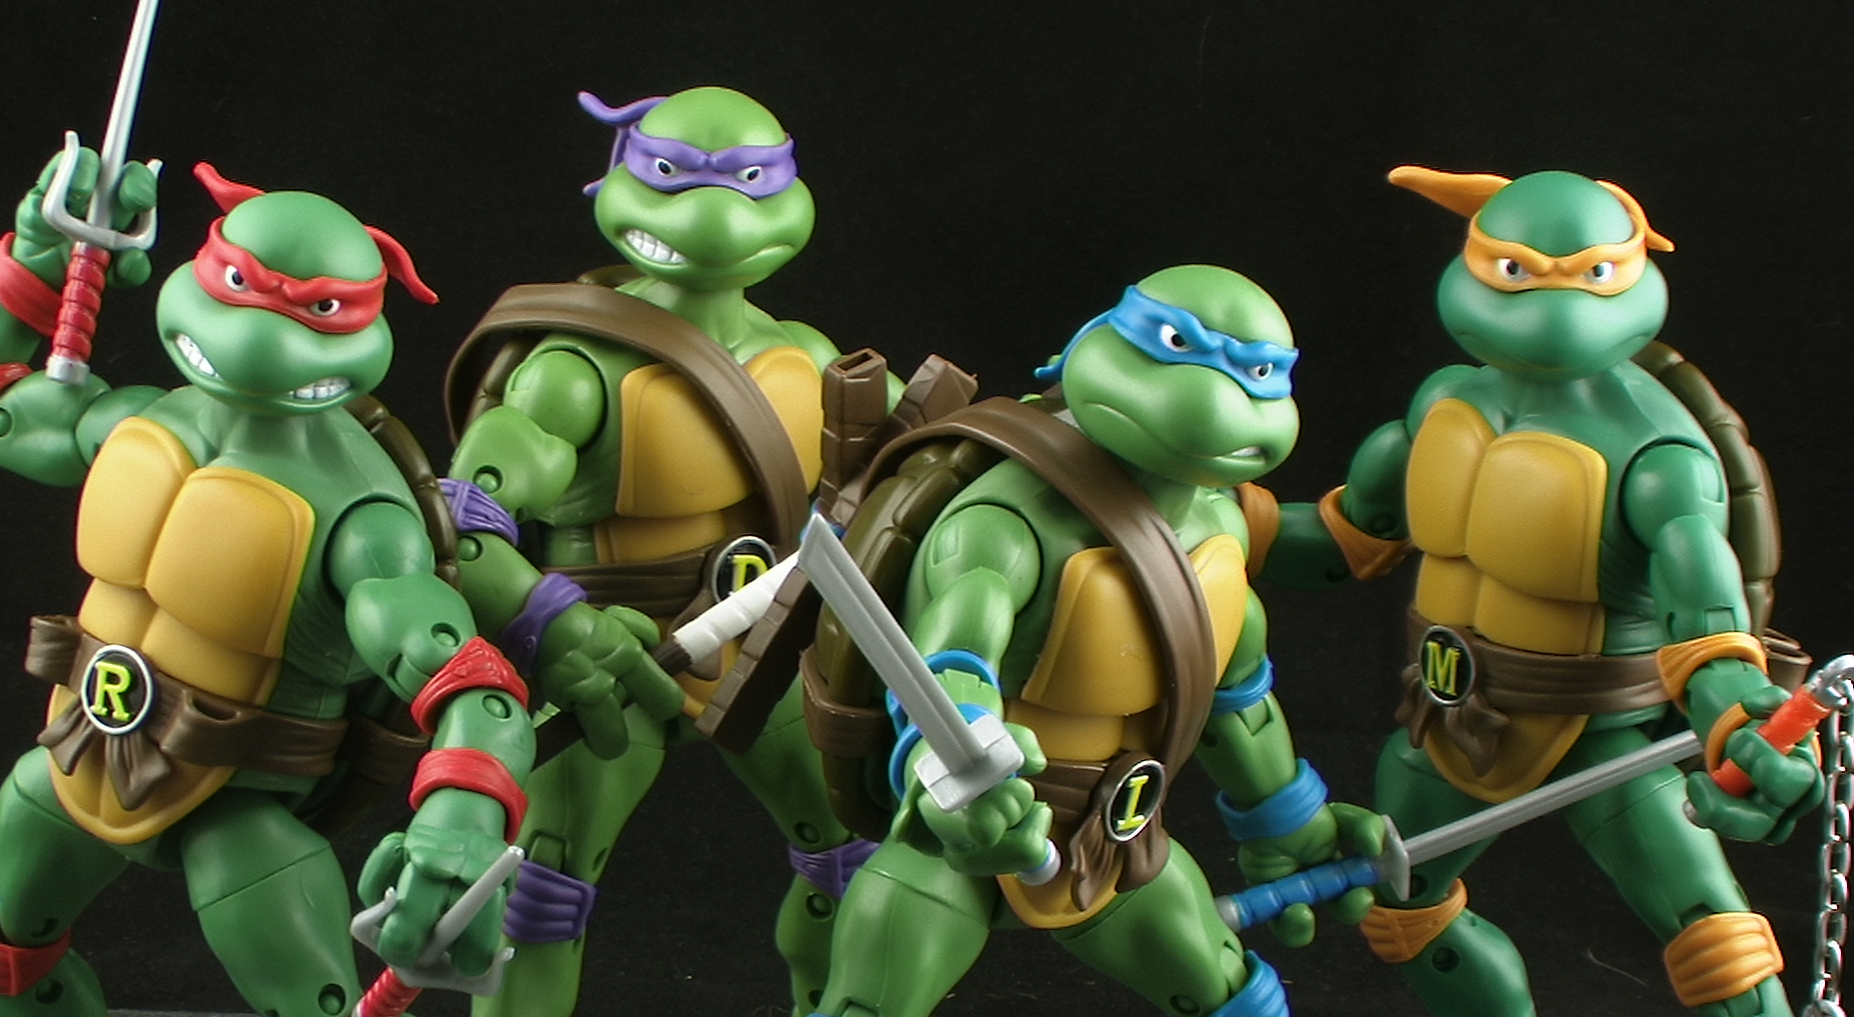 Nickelodeon And Activision Reveal New Teenage Mutant Ninja Turtles Game For  Wii And 3DS - My Nintendo News